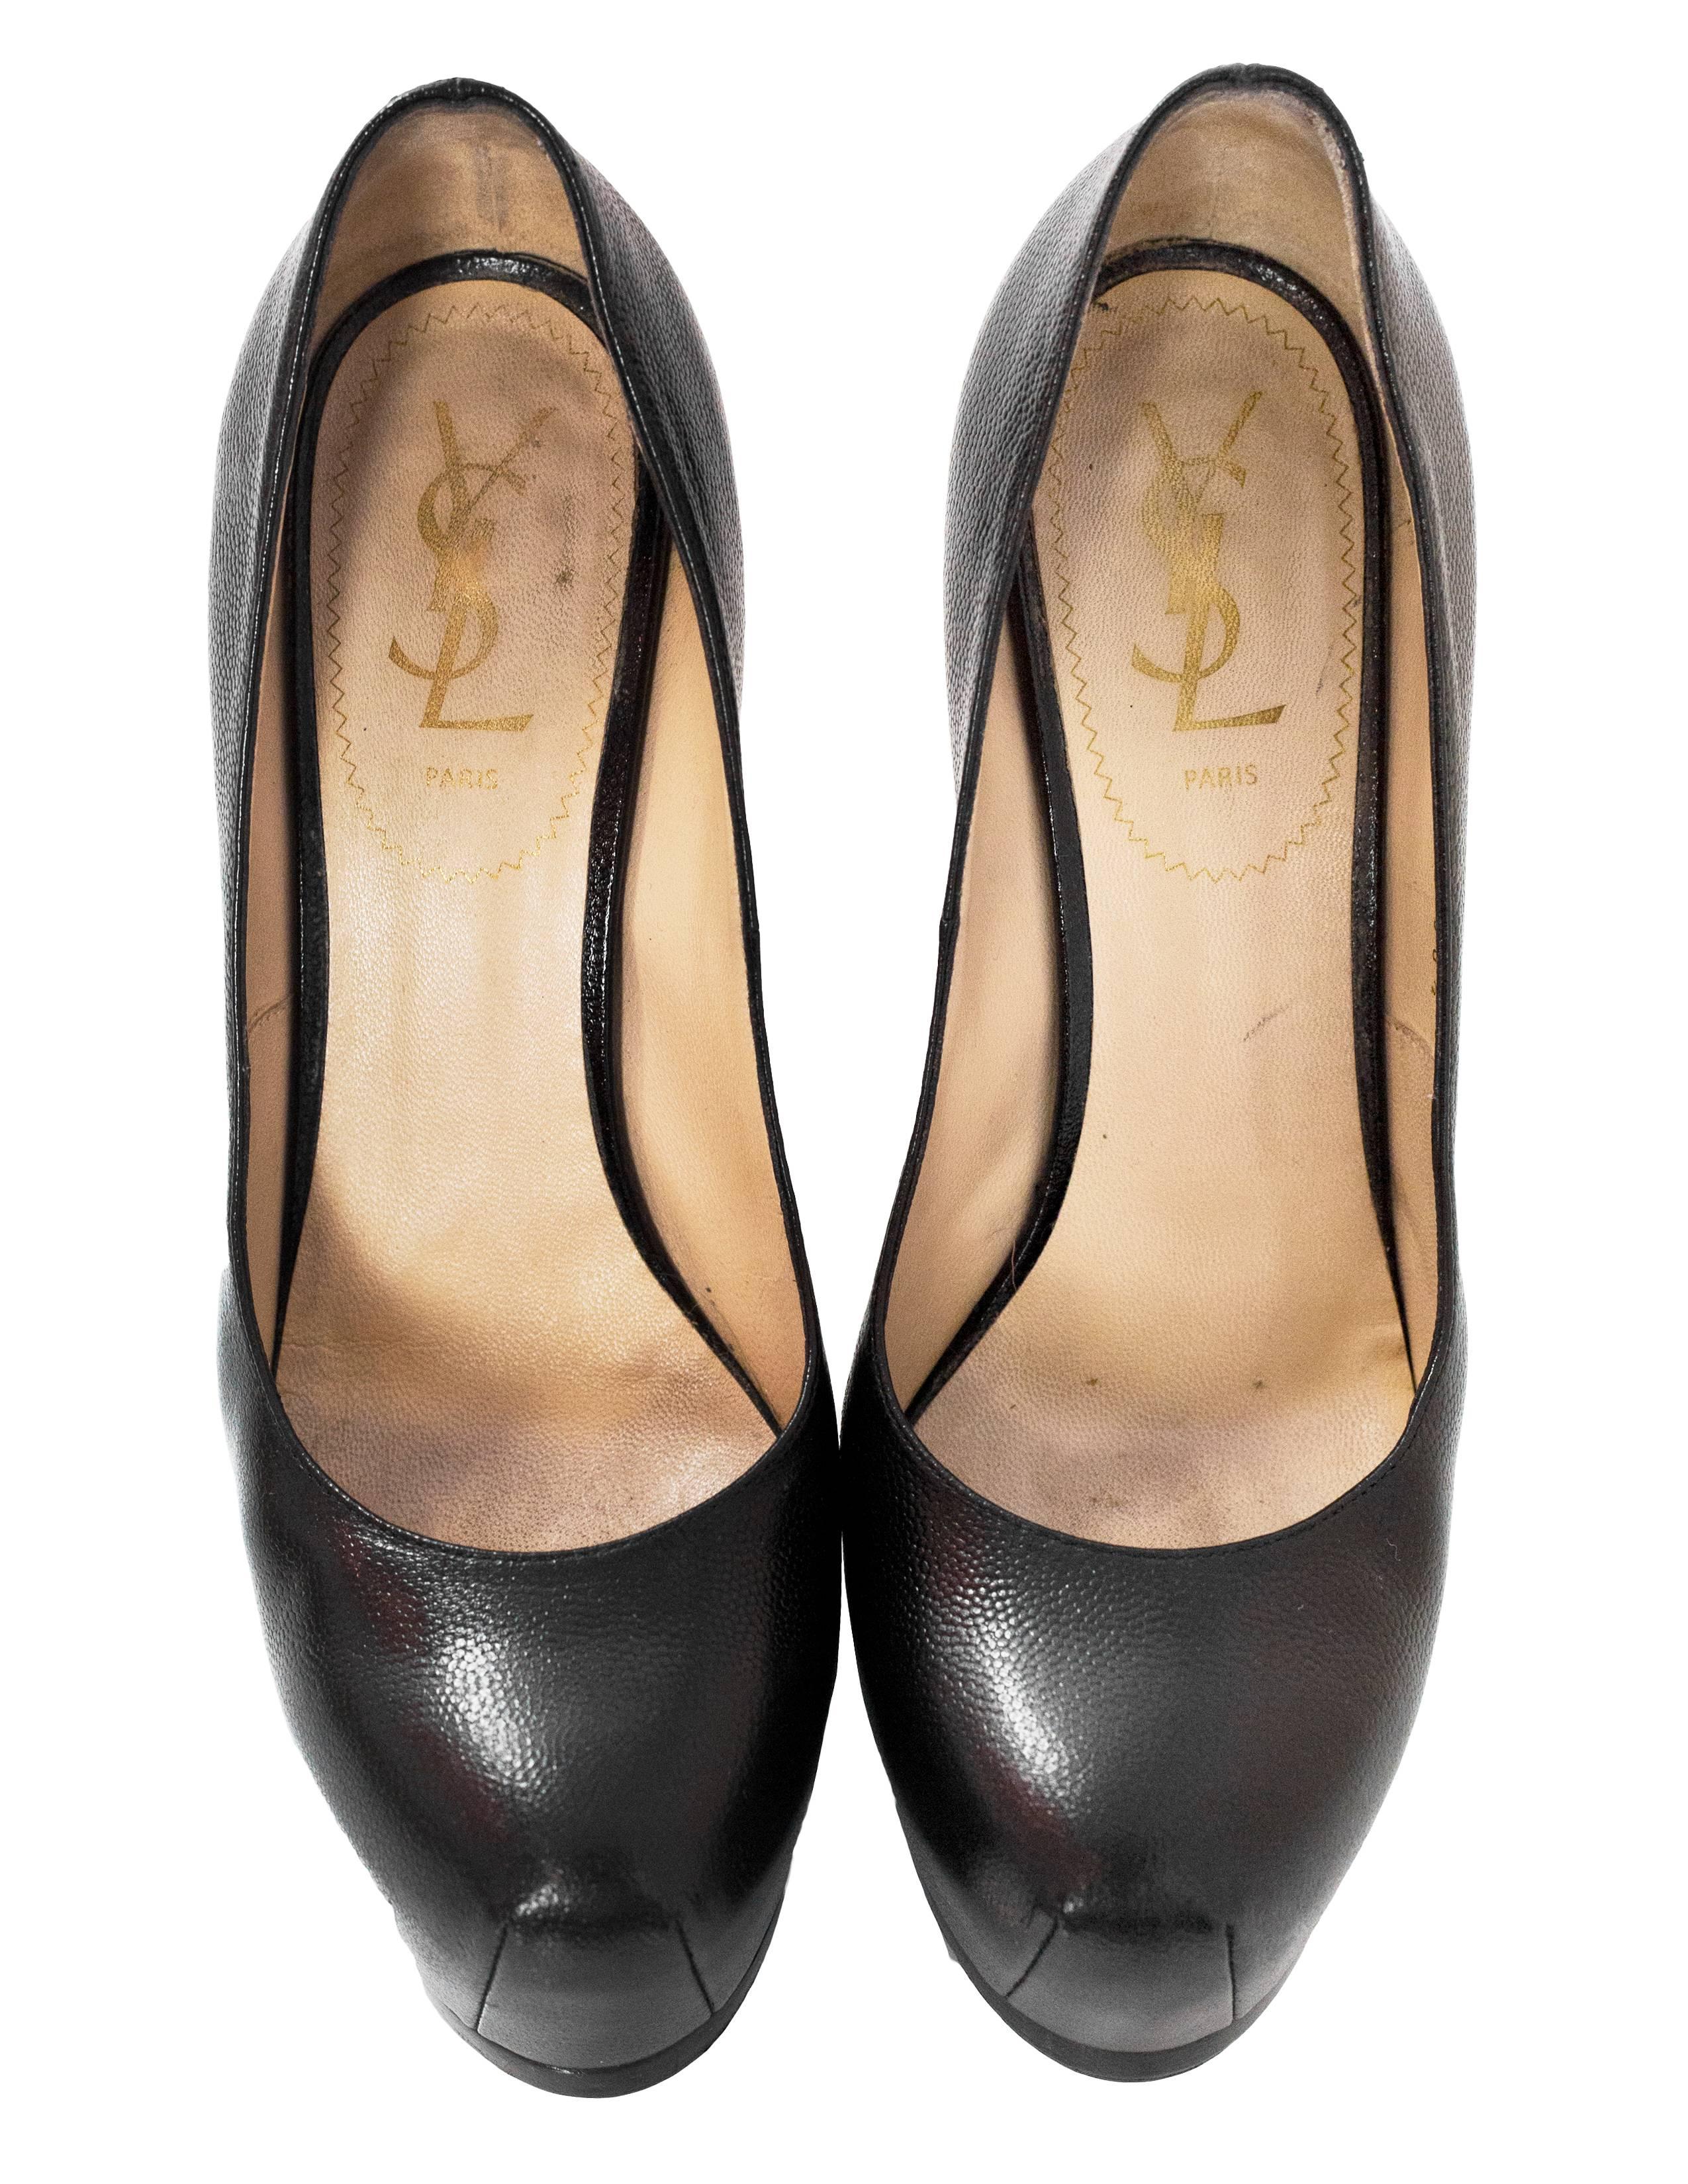 YSL Black Tribtoo Pumps Sz 38.5 with Box In Excellent Condition In New York, NY